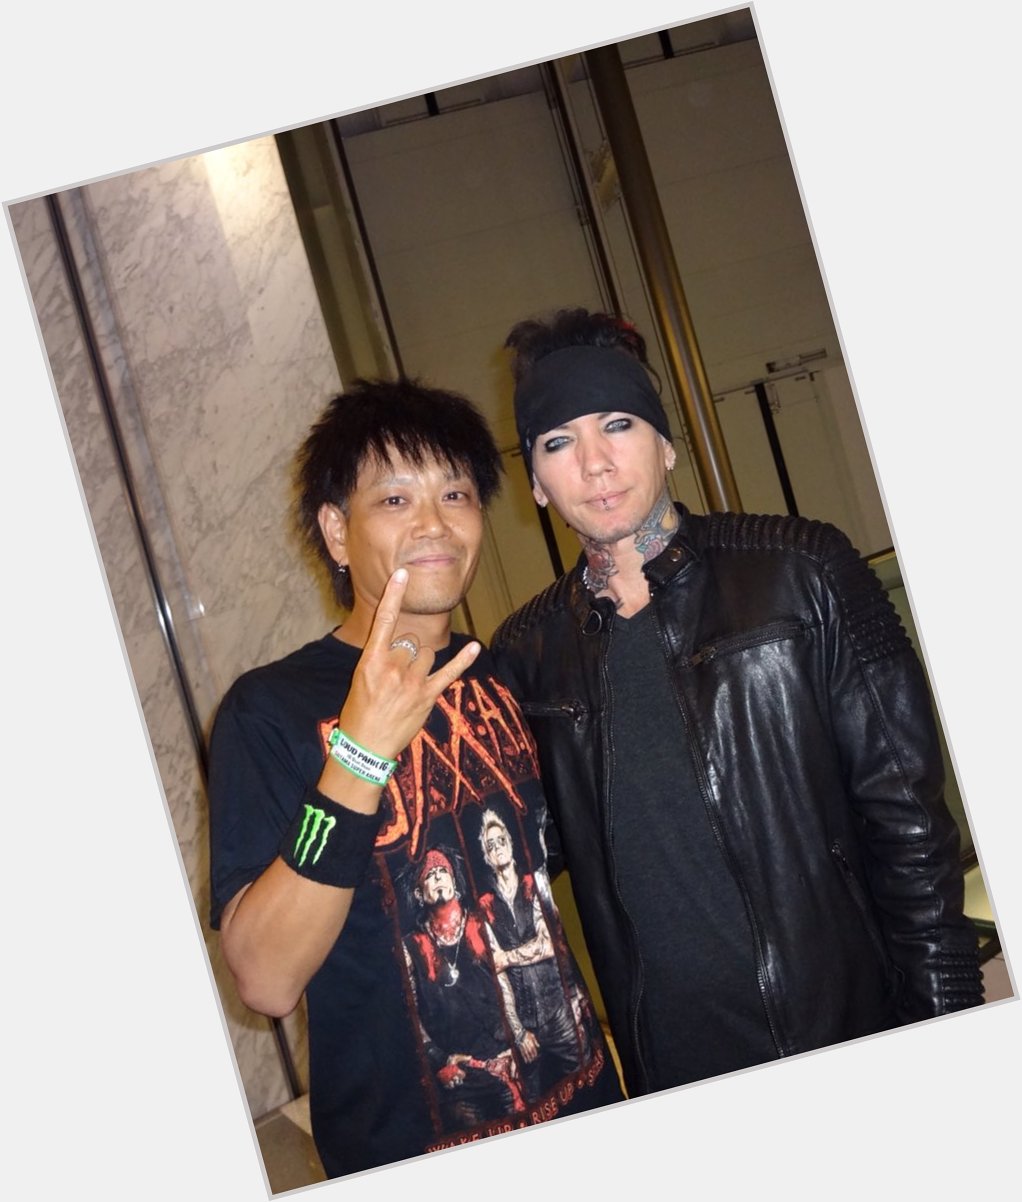  Happy Birthday to Dj Ashba    Here s a long-distance Happy Birthday to you from Japan  